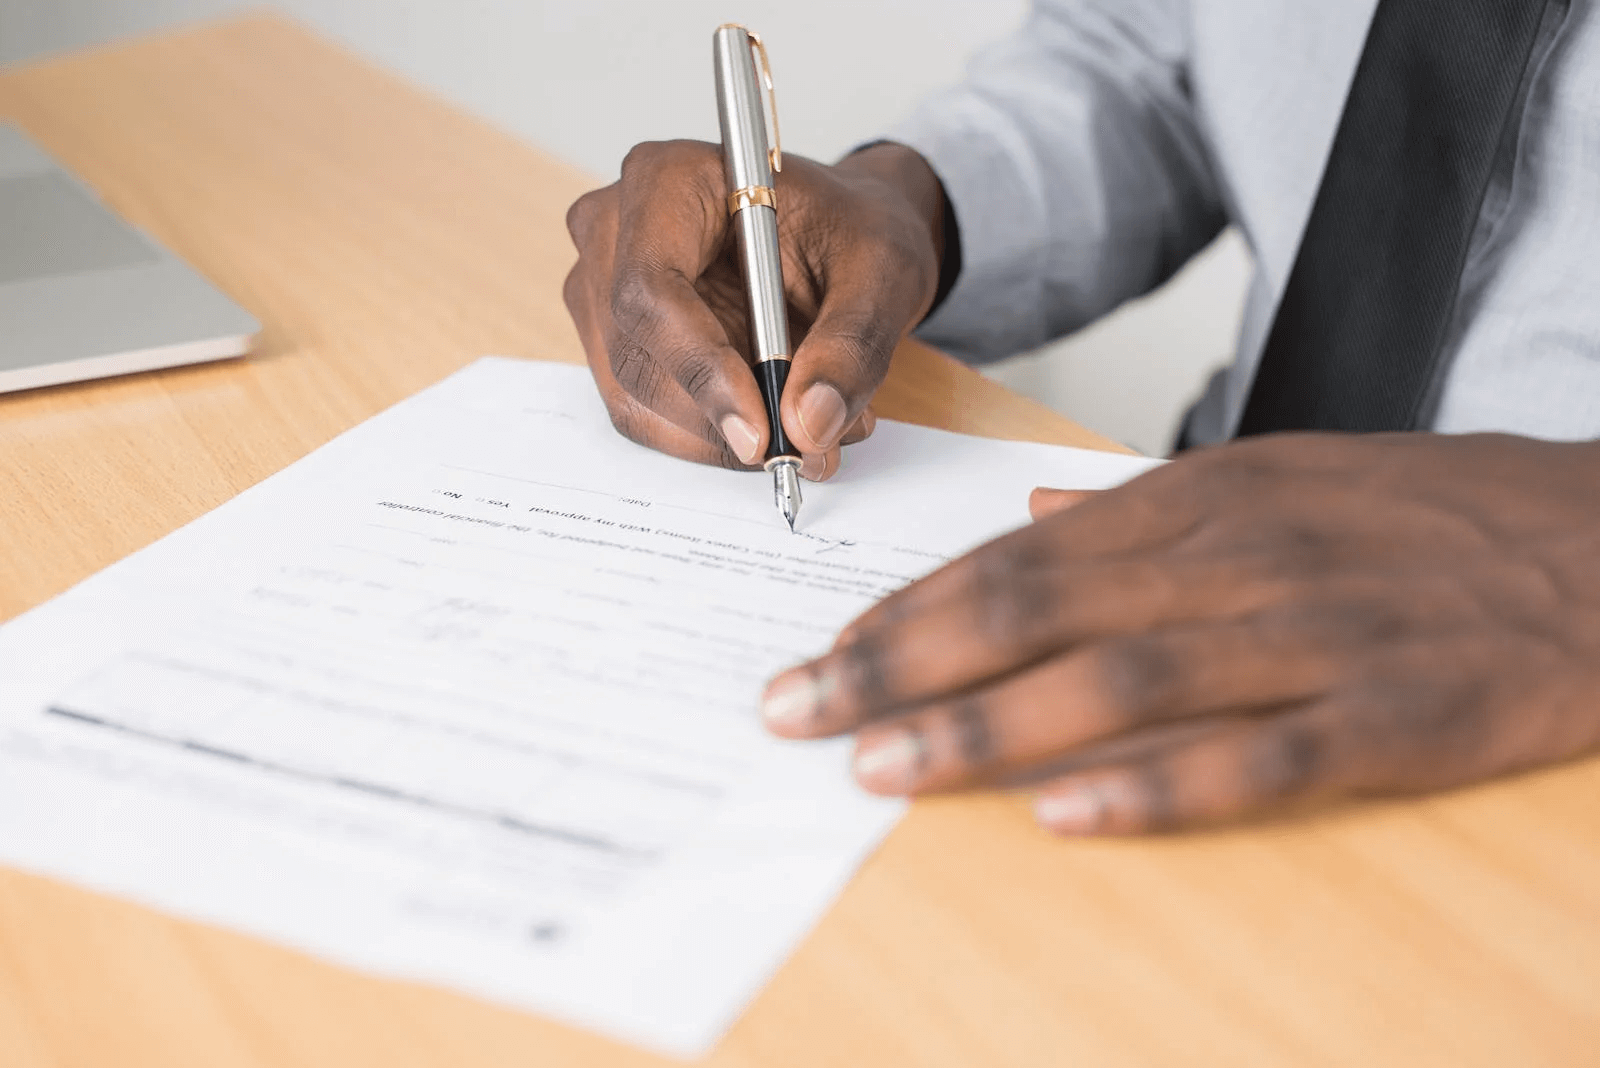 Image of a man's hands as he signs a document